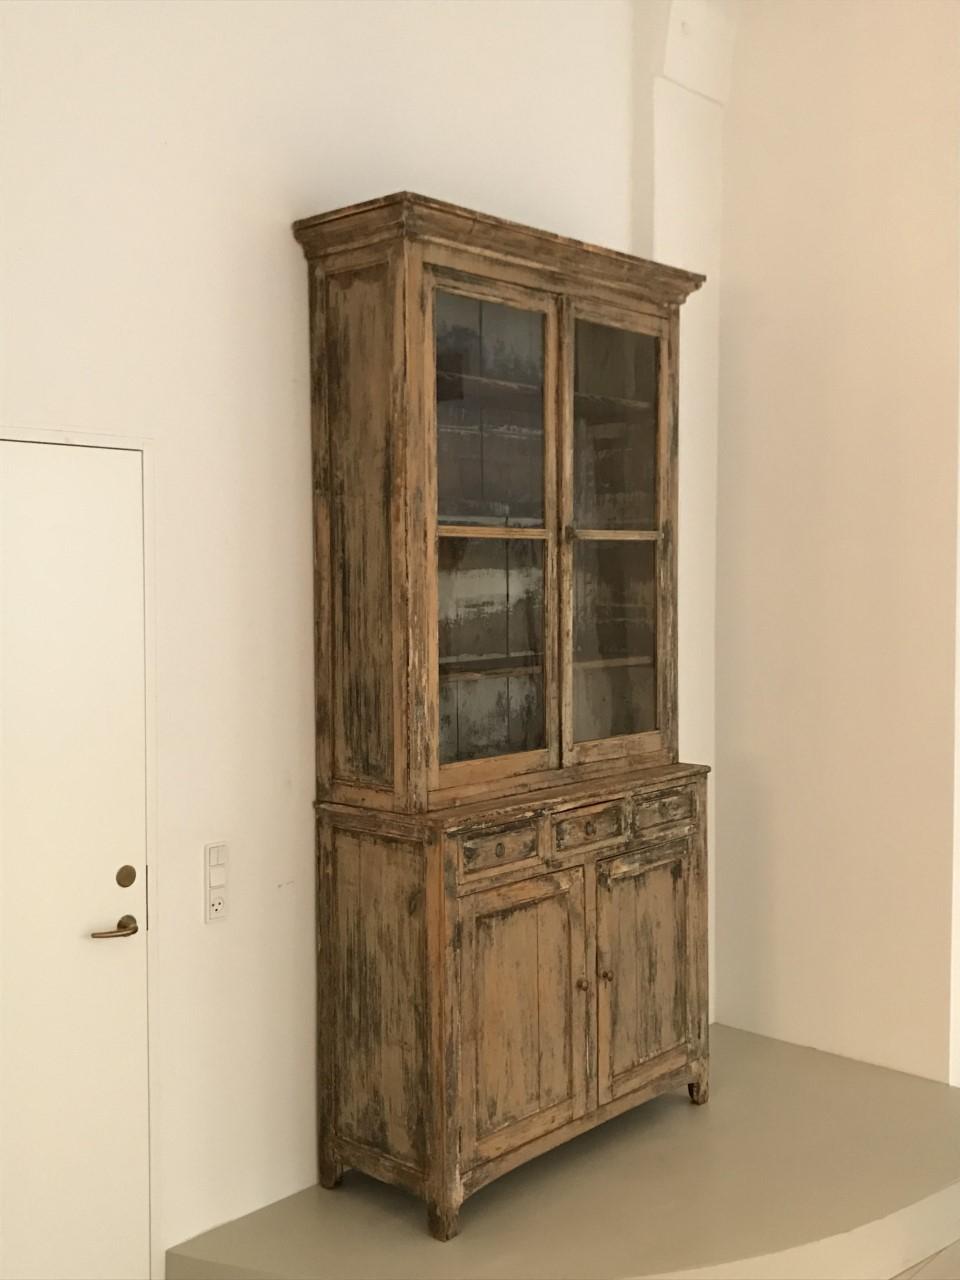 Wonderful vintage 2 part vitrine display cabinet, from late 19th century- early 20th century France. Ideal storage for crockery and glassware, for example.

This piece consists of an upper part in glass, with double original glass doors, as well